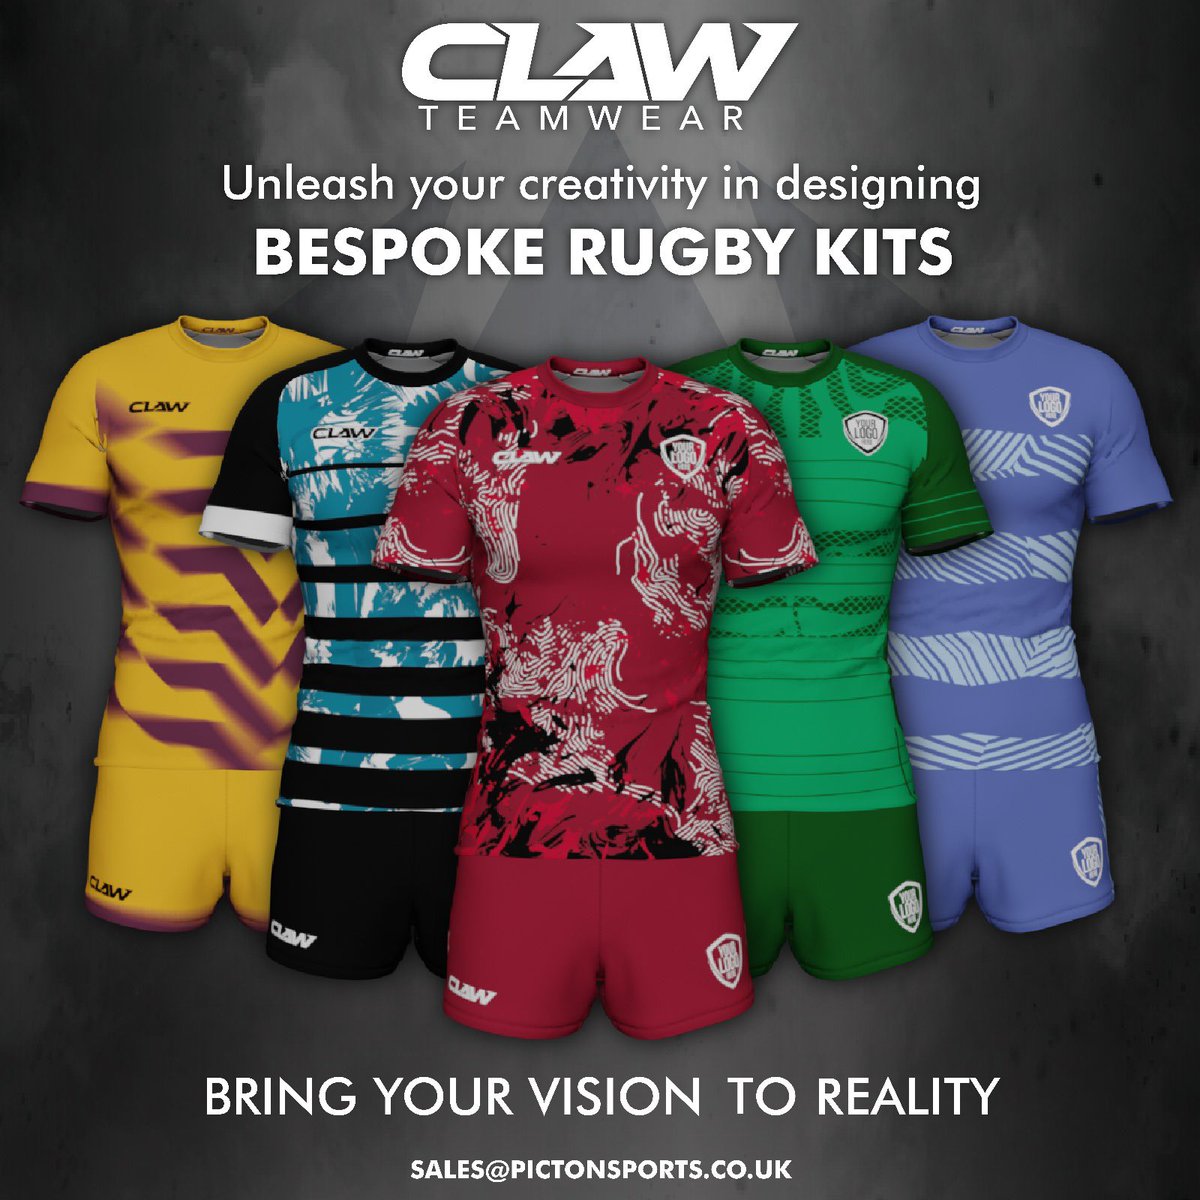 Looking for a new supplier for the 24/25 season? Do you want to say goodbye to minimum order quantities and hello to watching your kit being made? Join forces with us and dominate the new season together! #madeinwales #clawteamwear